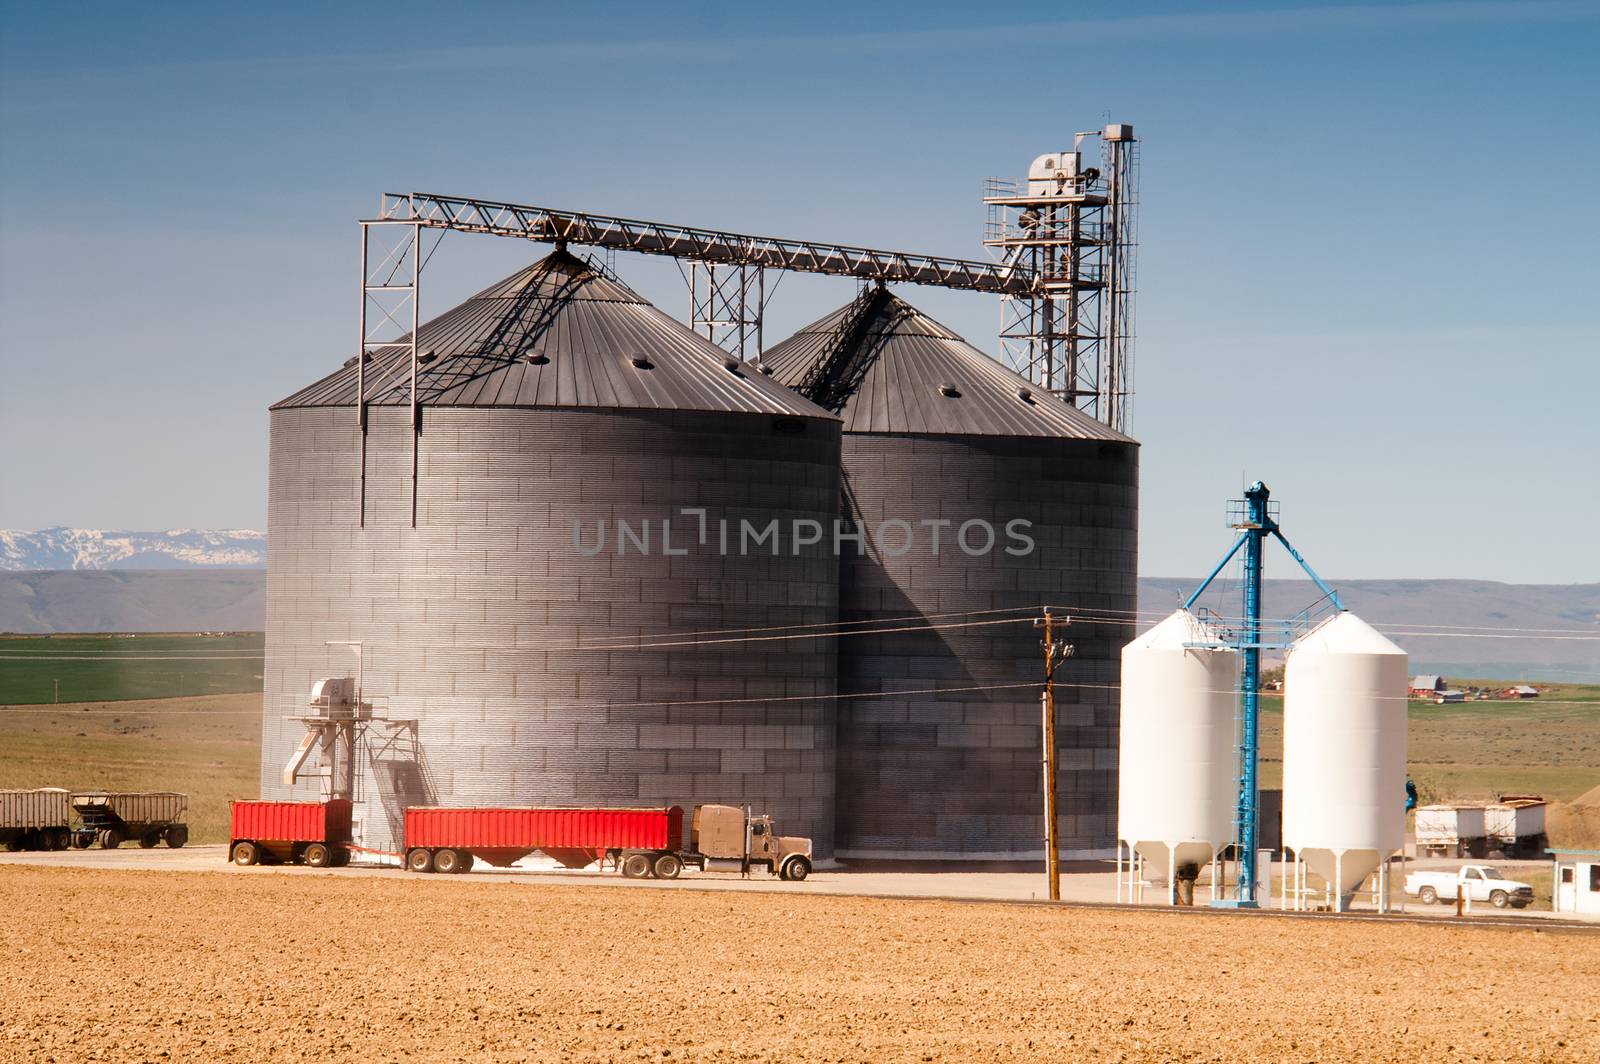 Agricultural Silo Loads Semi Truck With Farm Grown Food Grain by ChrisBoswell